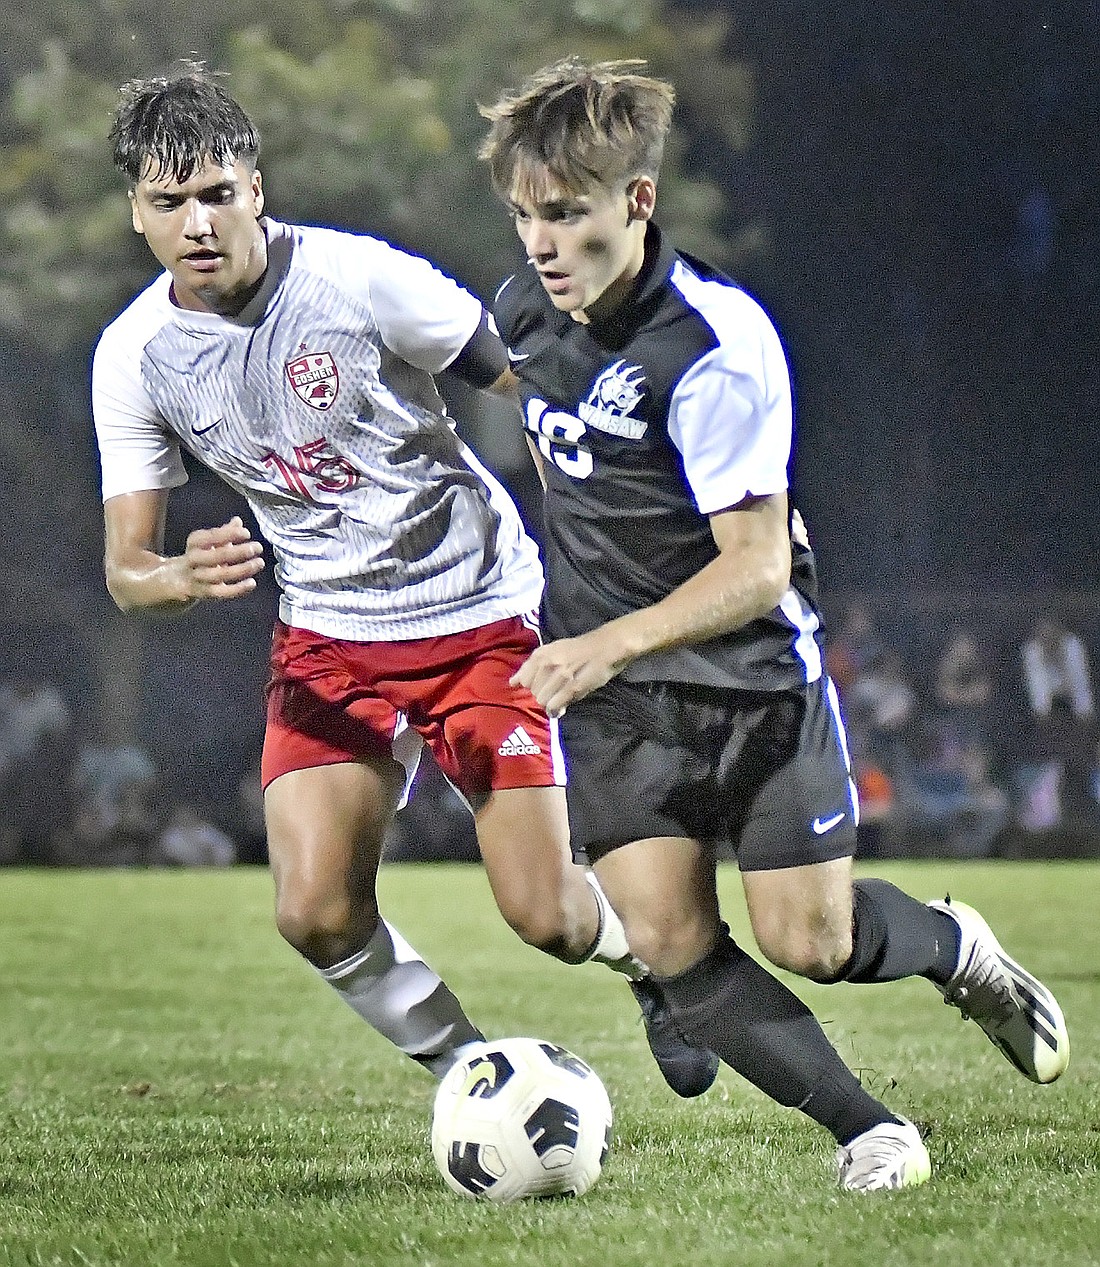 Junior Ashton Ault of Warsaw turns the ball upfield as Goshen's Cesar Vela defends during Thursday night's match at Warsaw. Photo by Gary Nieter